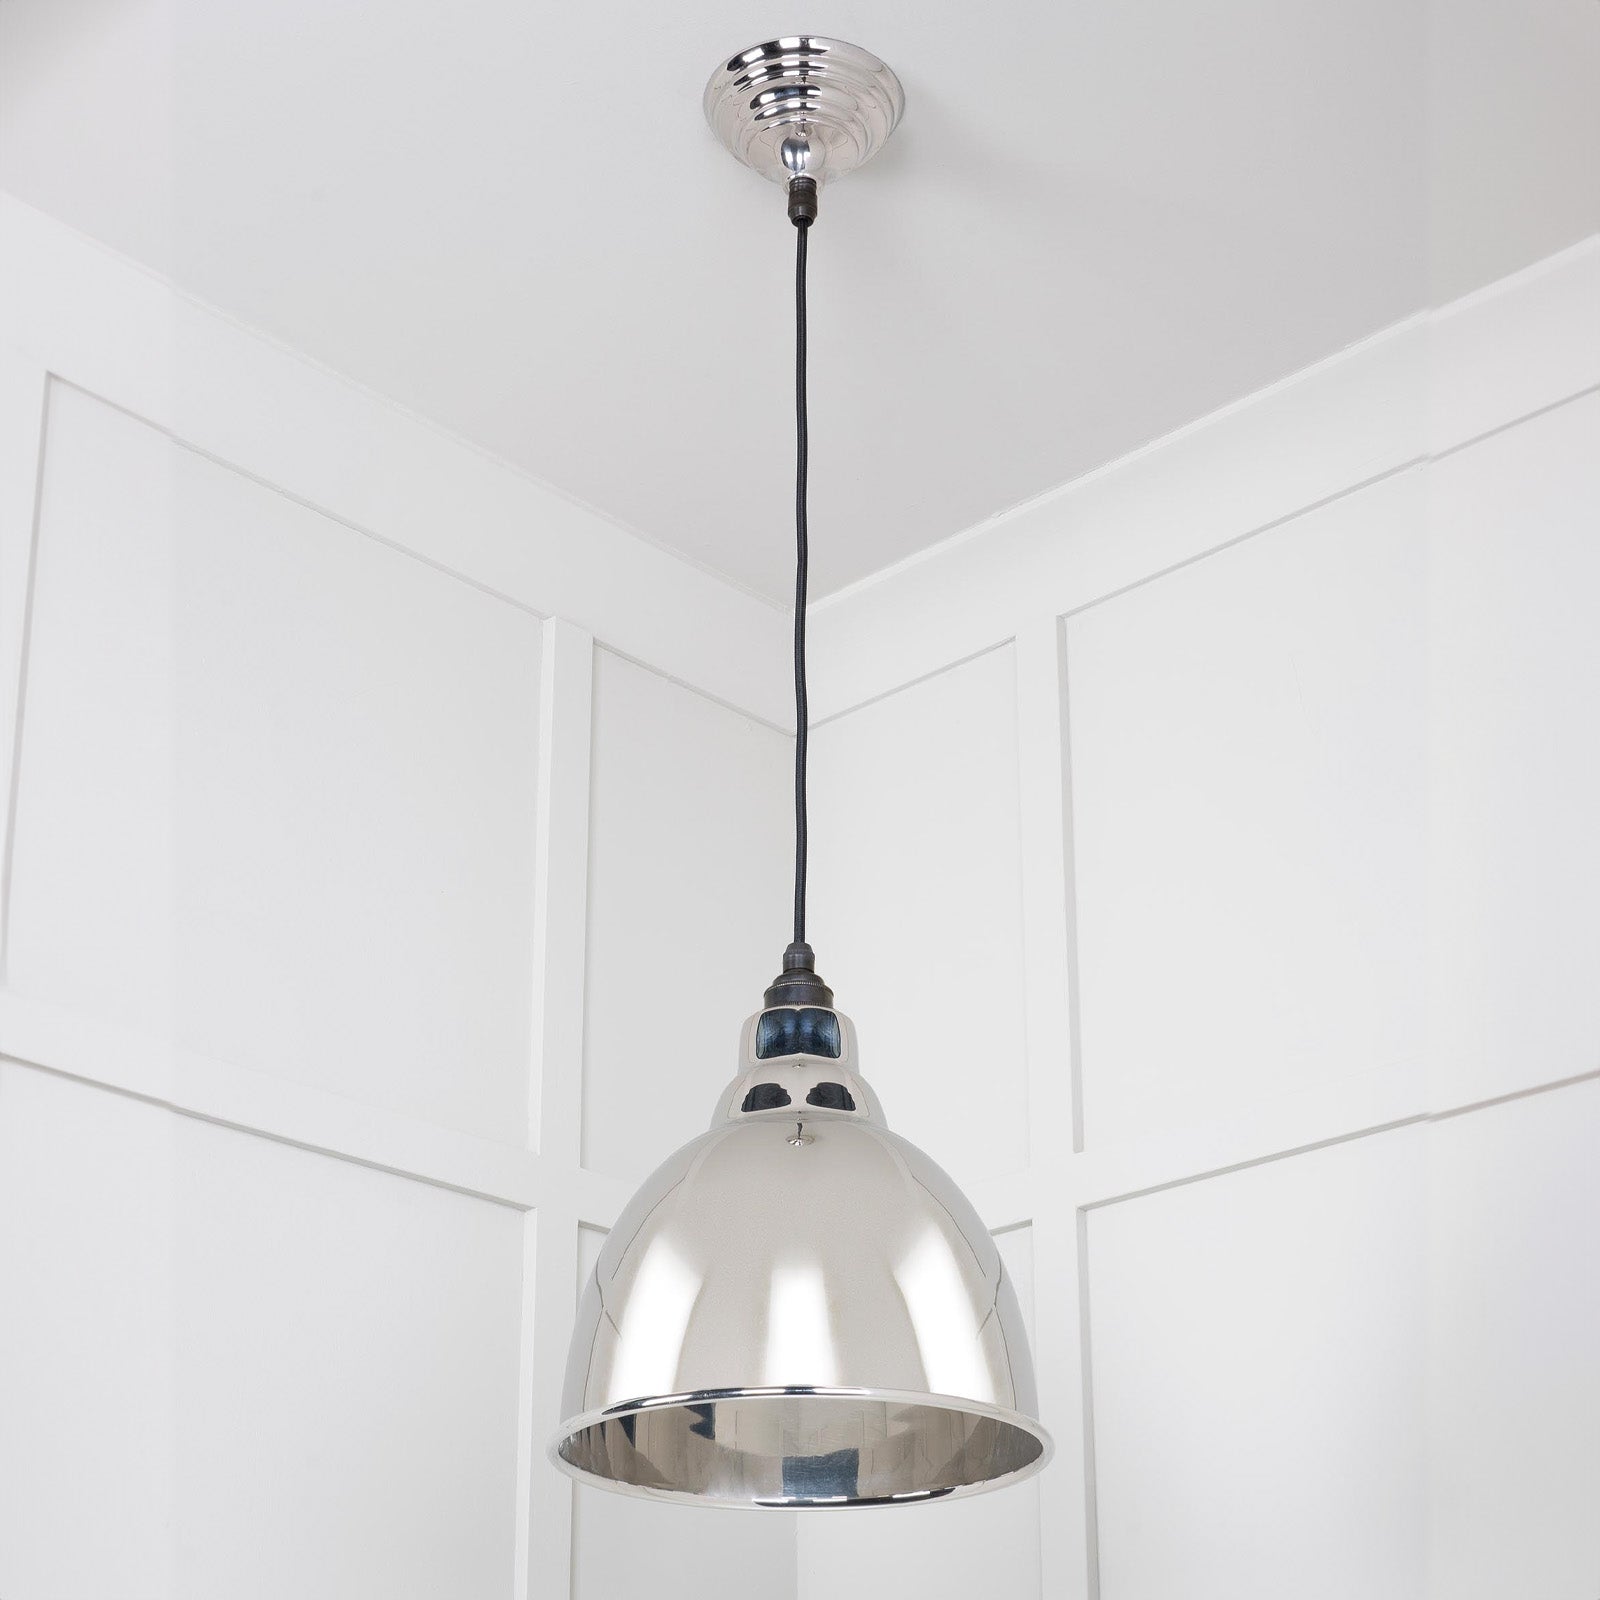 SHOW Full Image of Hanging Brindley Ceiling Light in Nickel